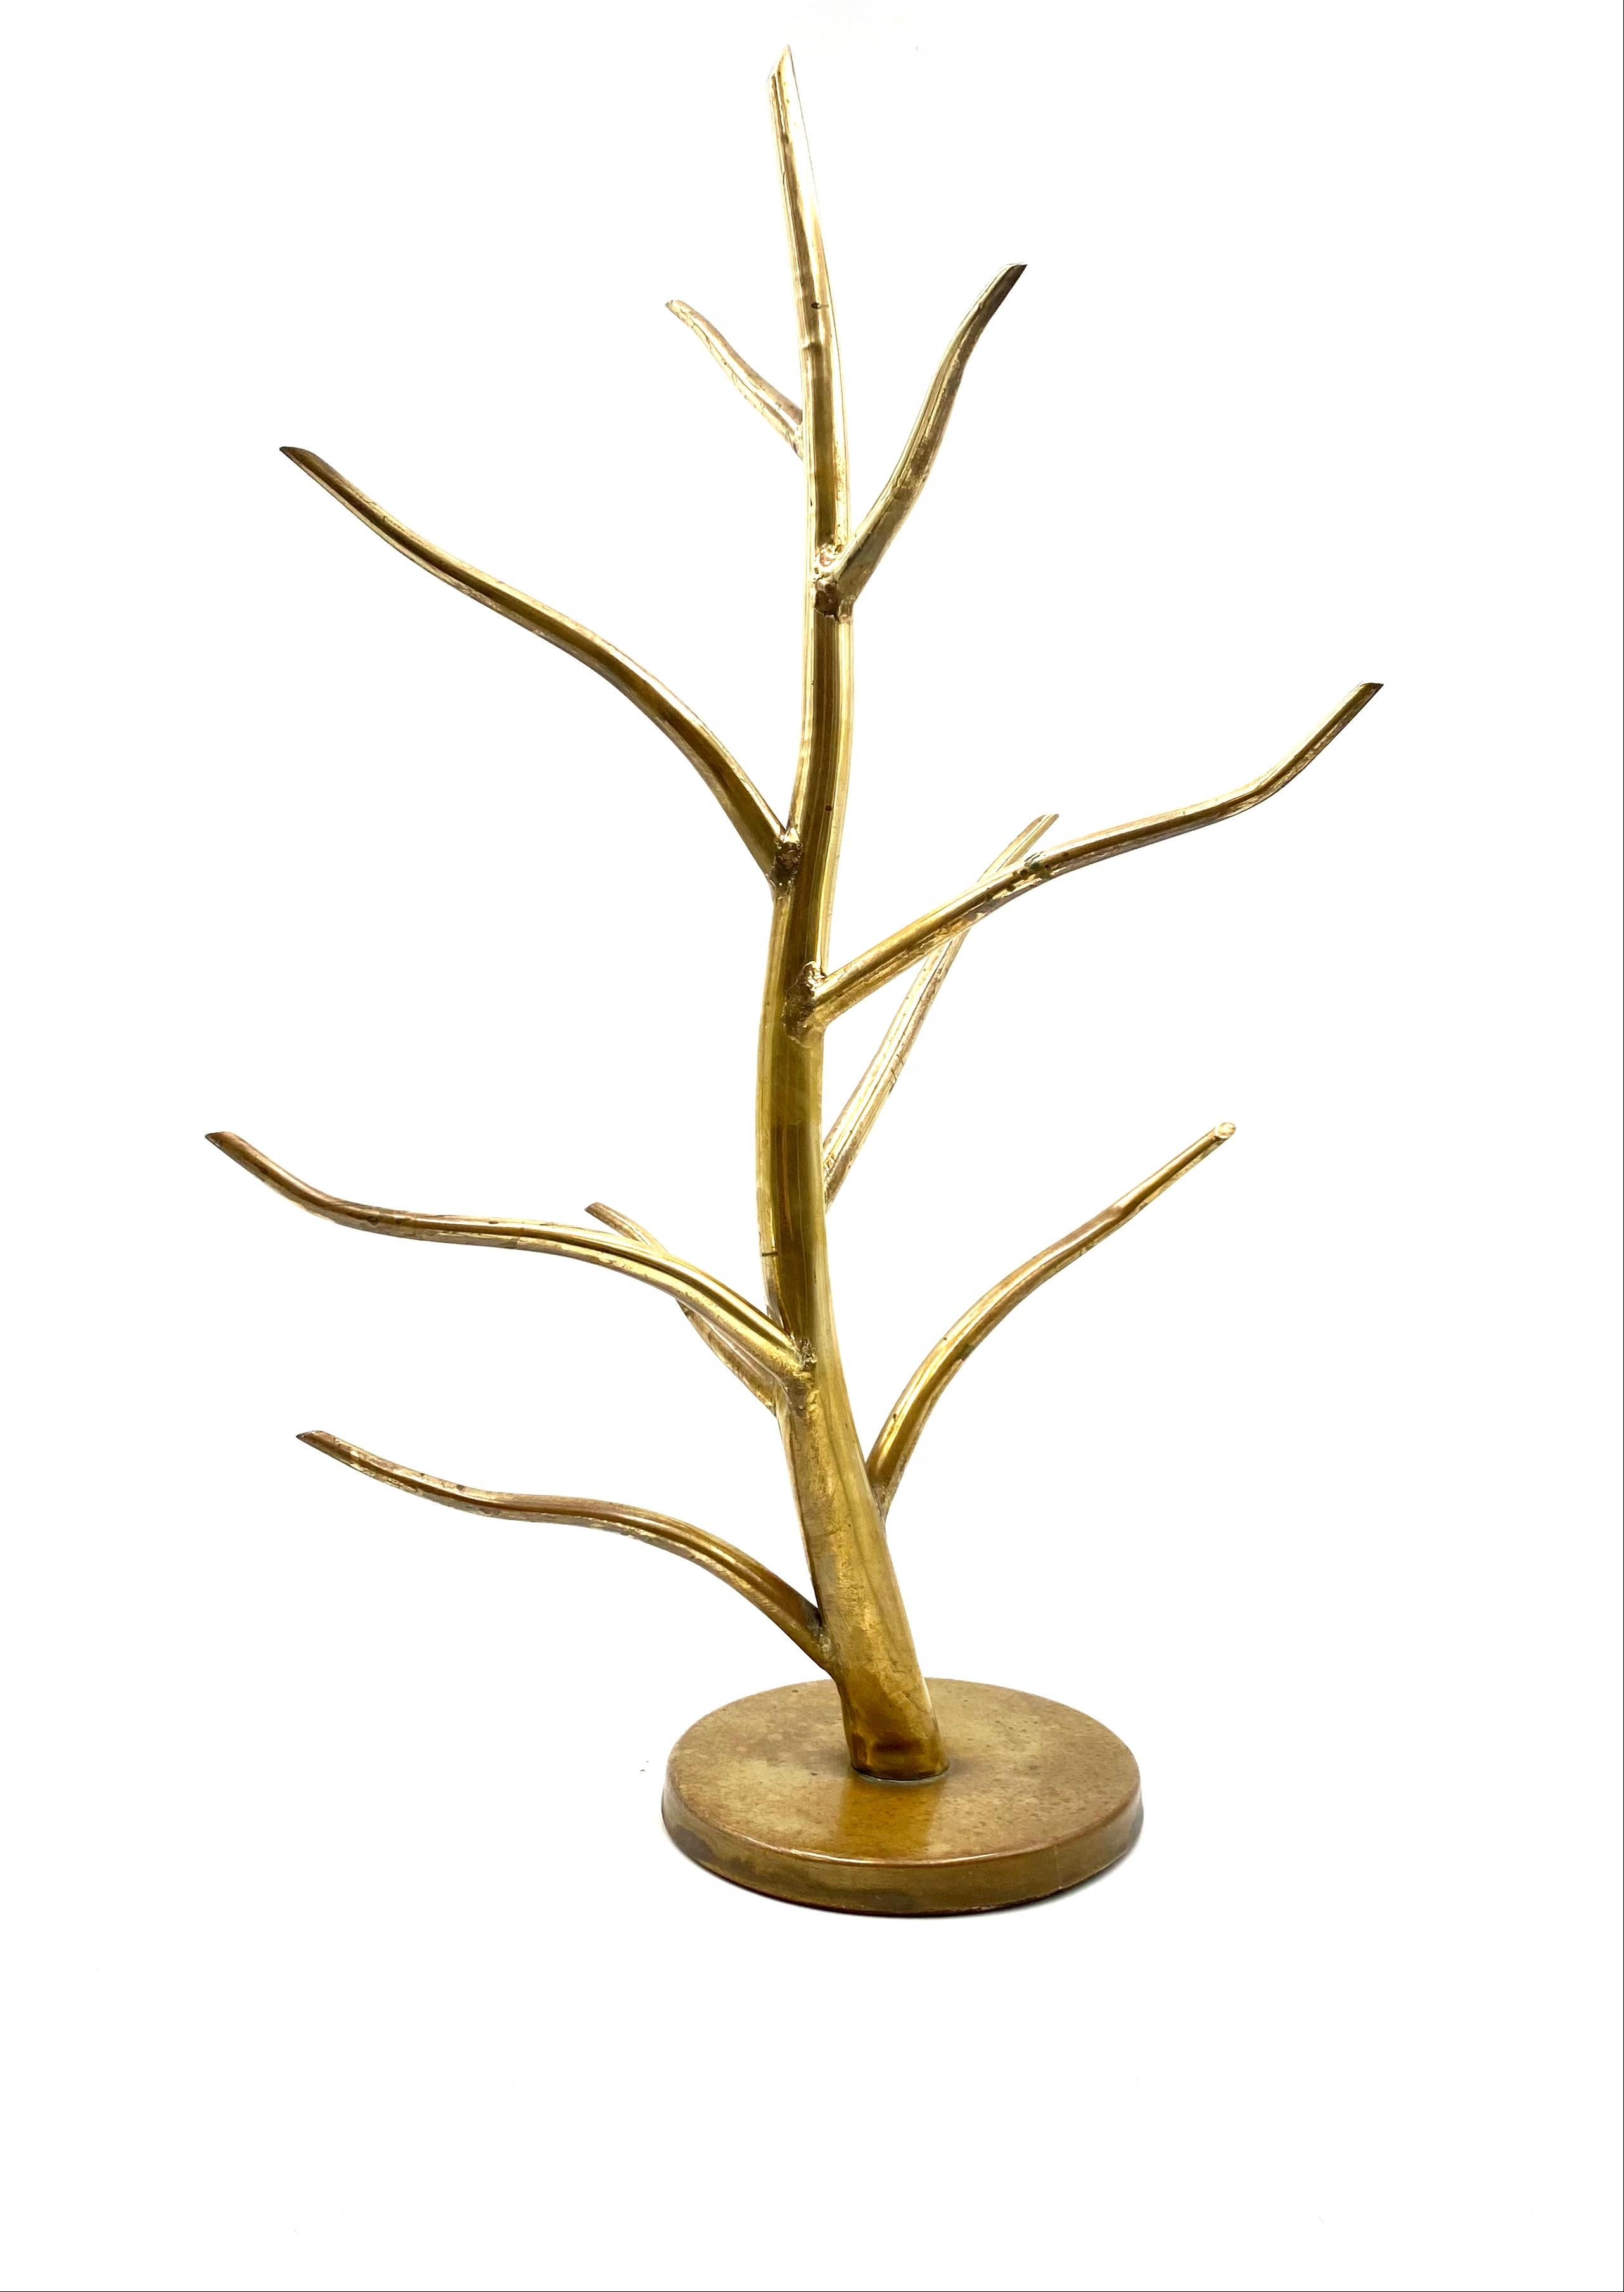 Midcentury Brass Plant-Shaped Stand, Italy, 1970s For Sale 7